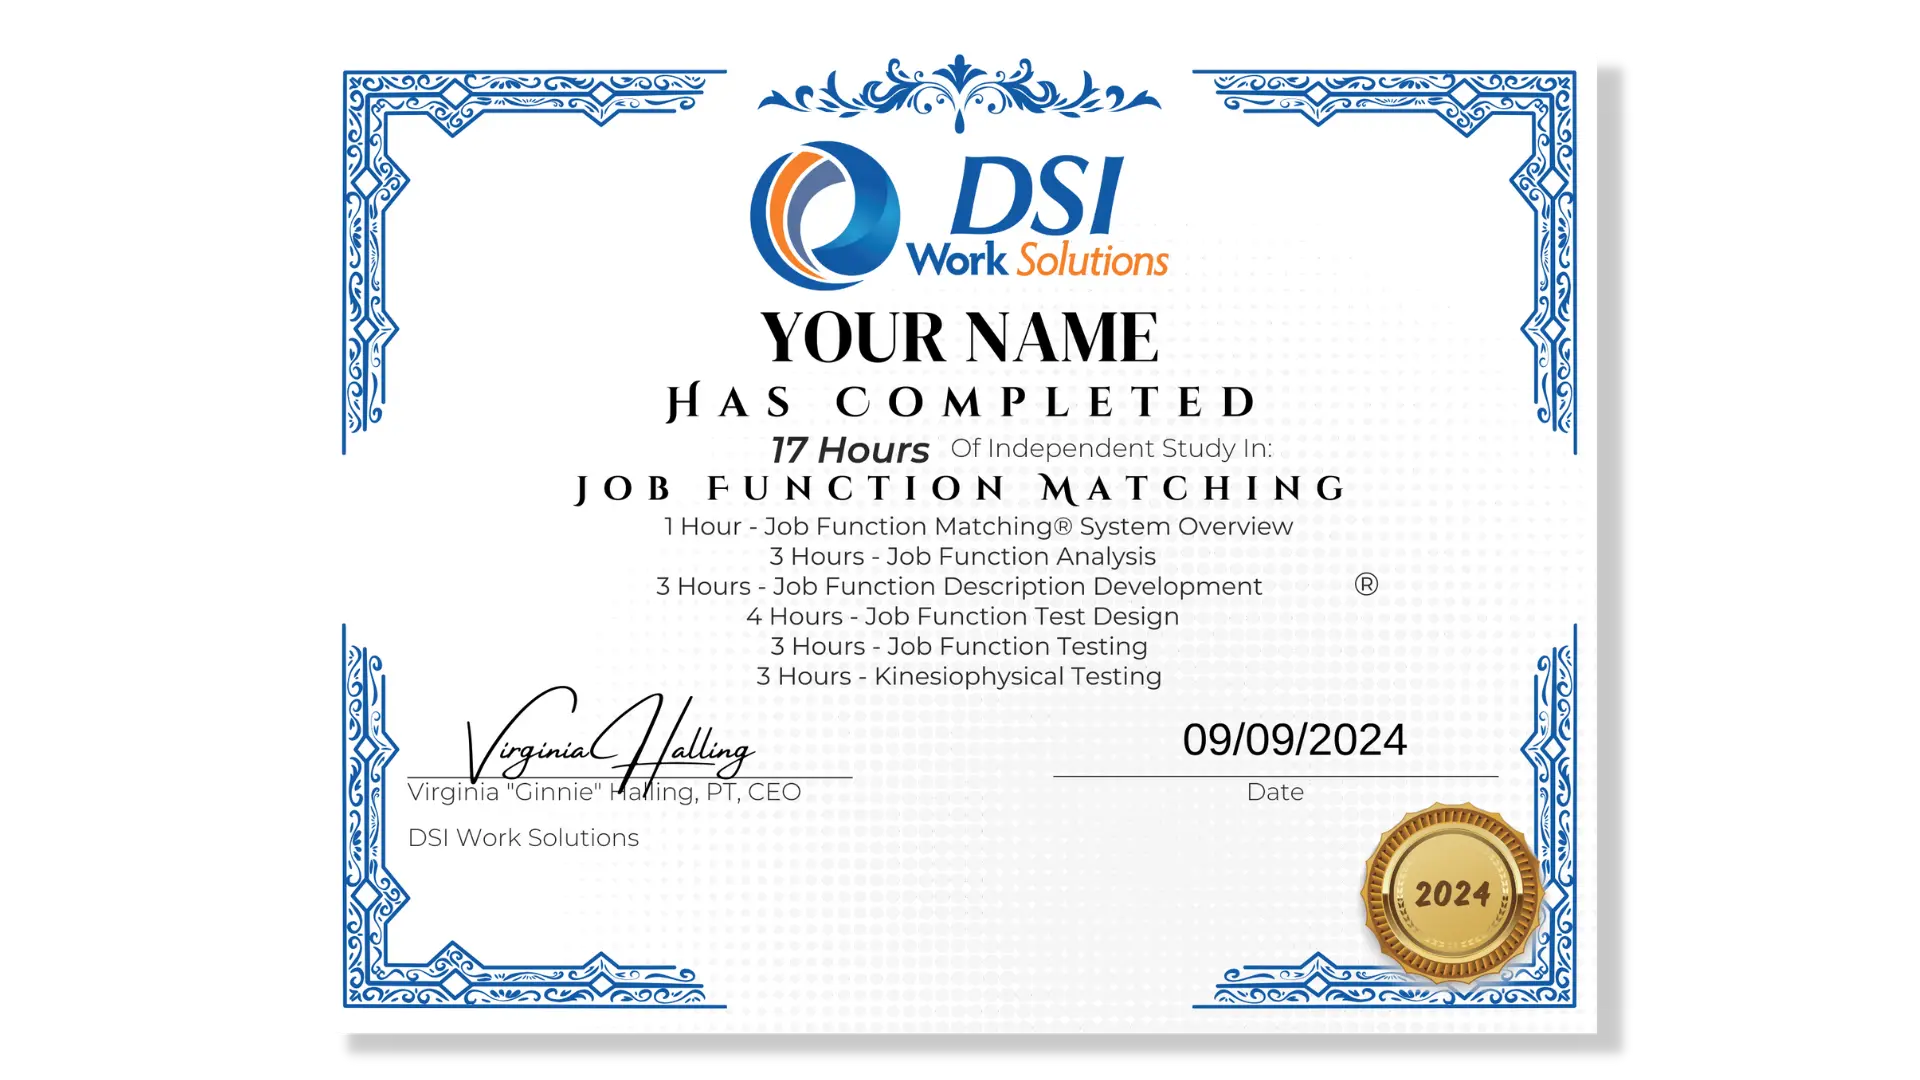 A Course Certificate for the Job Function Matching System Independent Learning.